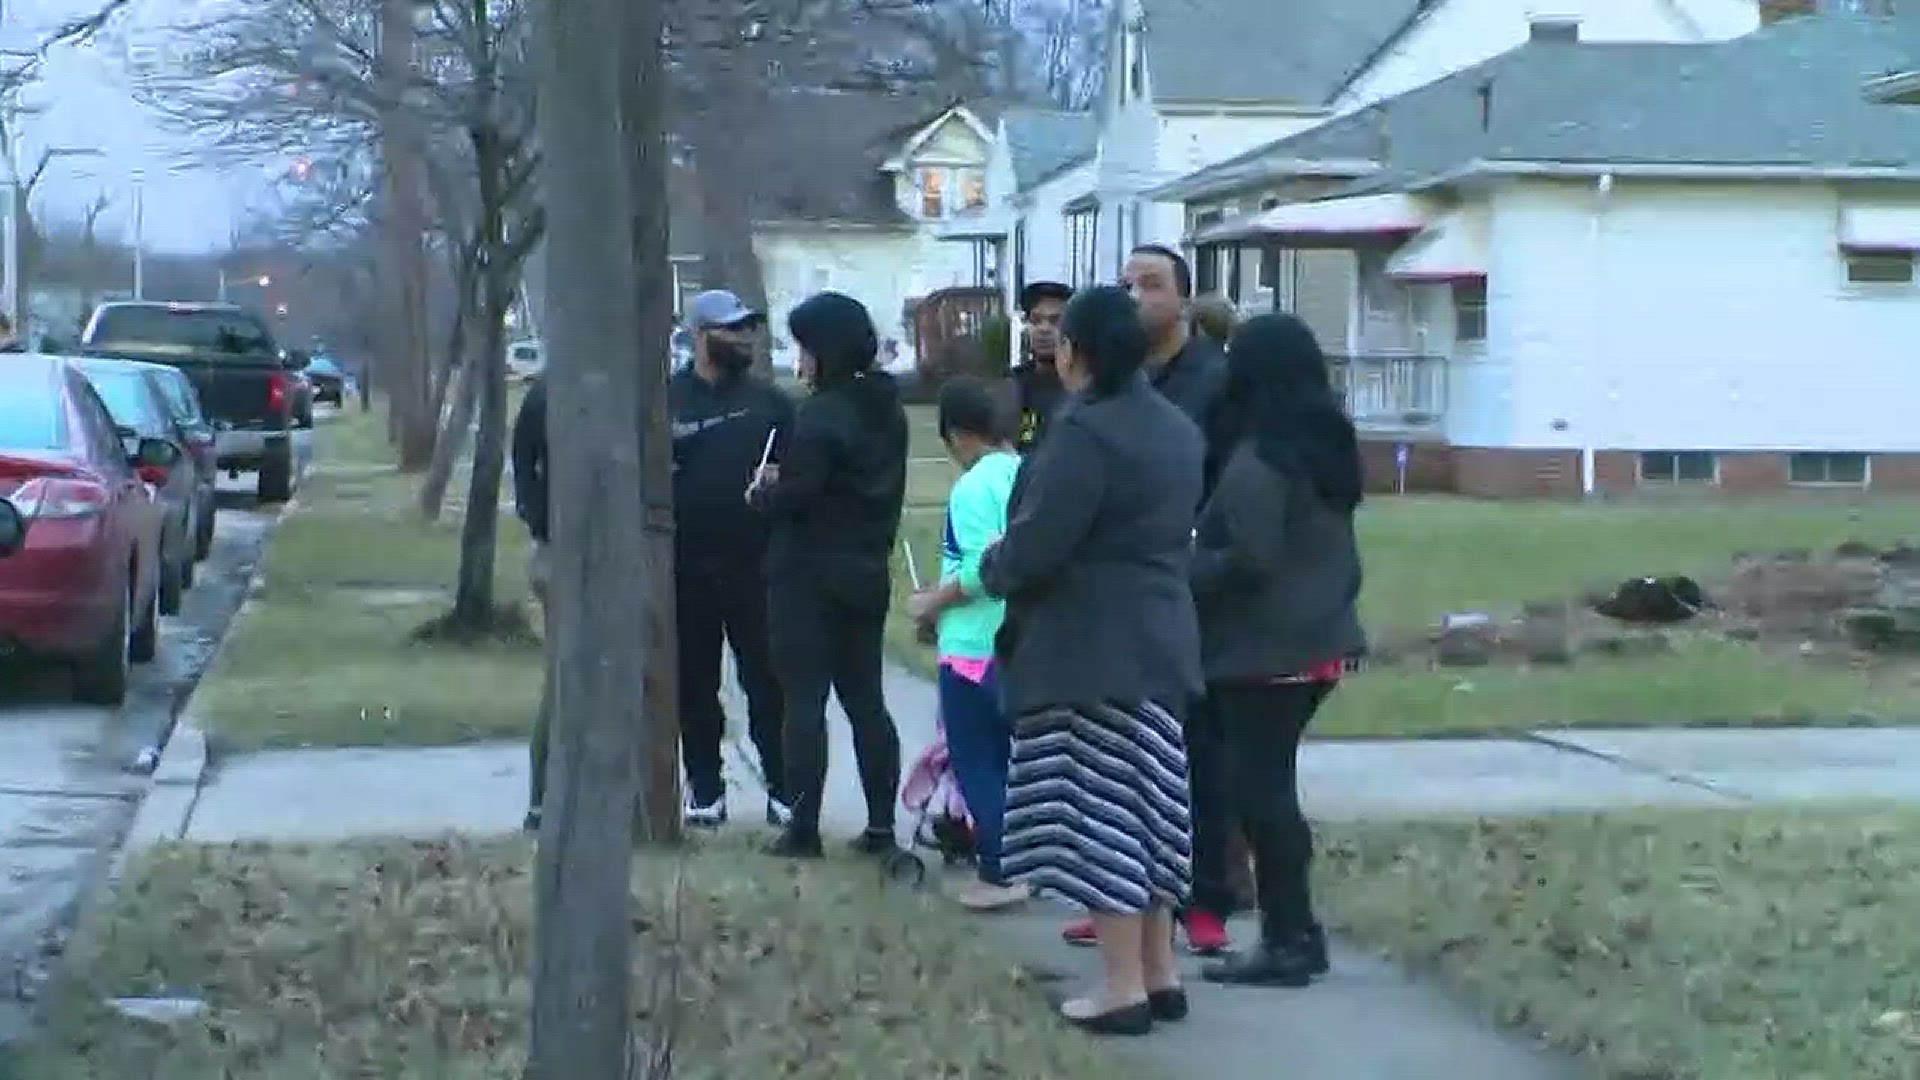 Vigil being held for 4-year-old found dead at vacant Longmead Avenue home